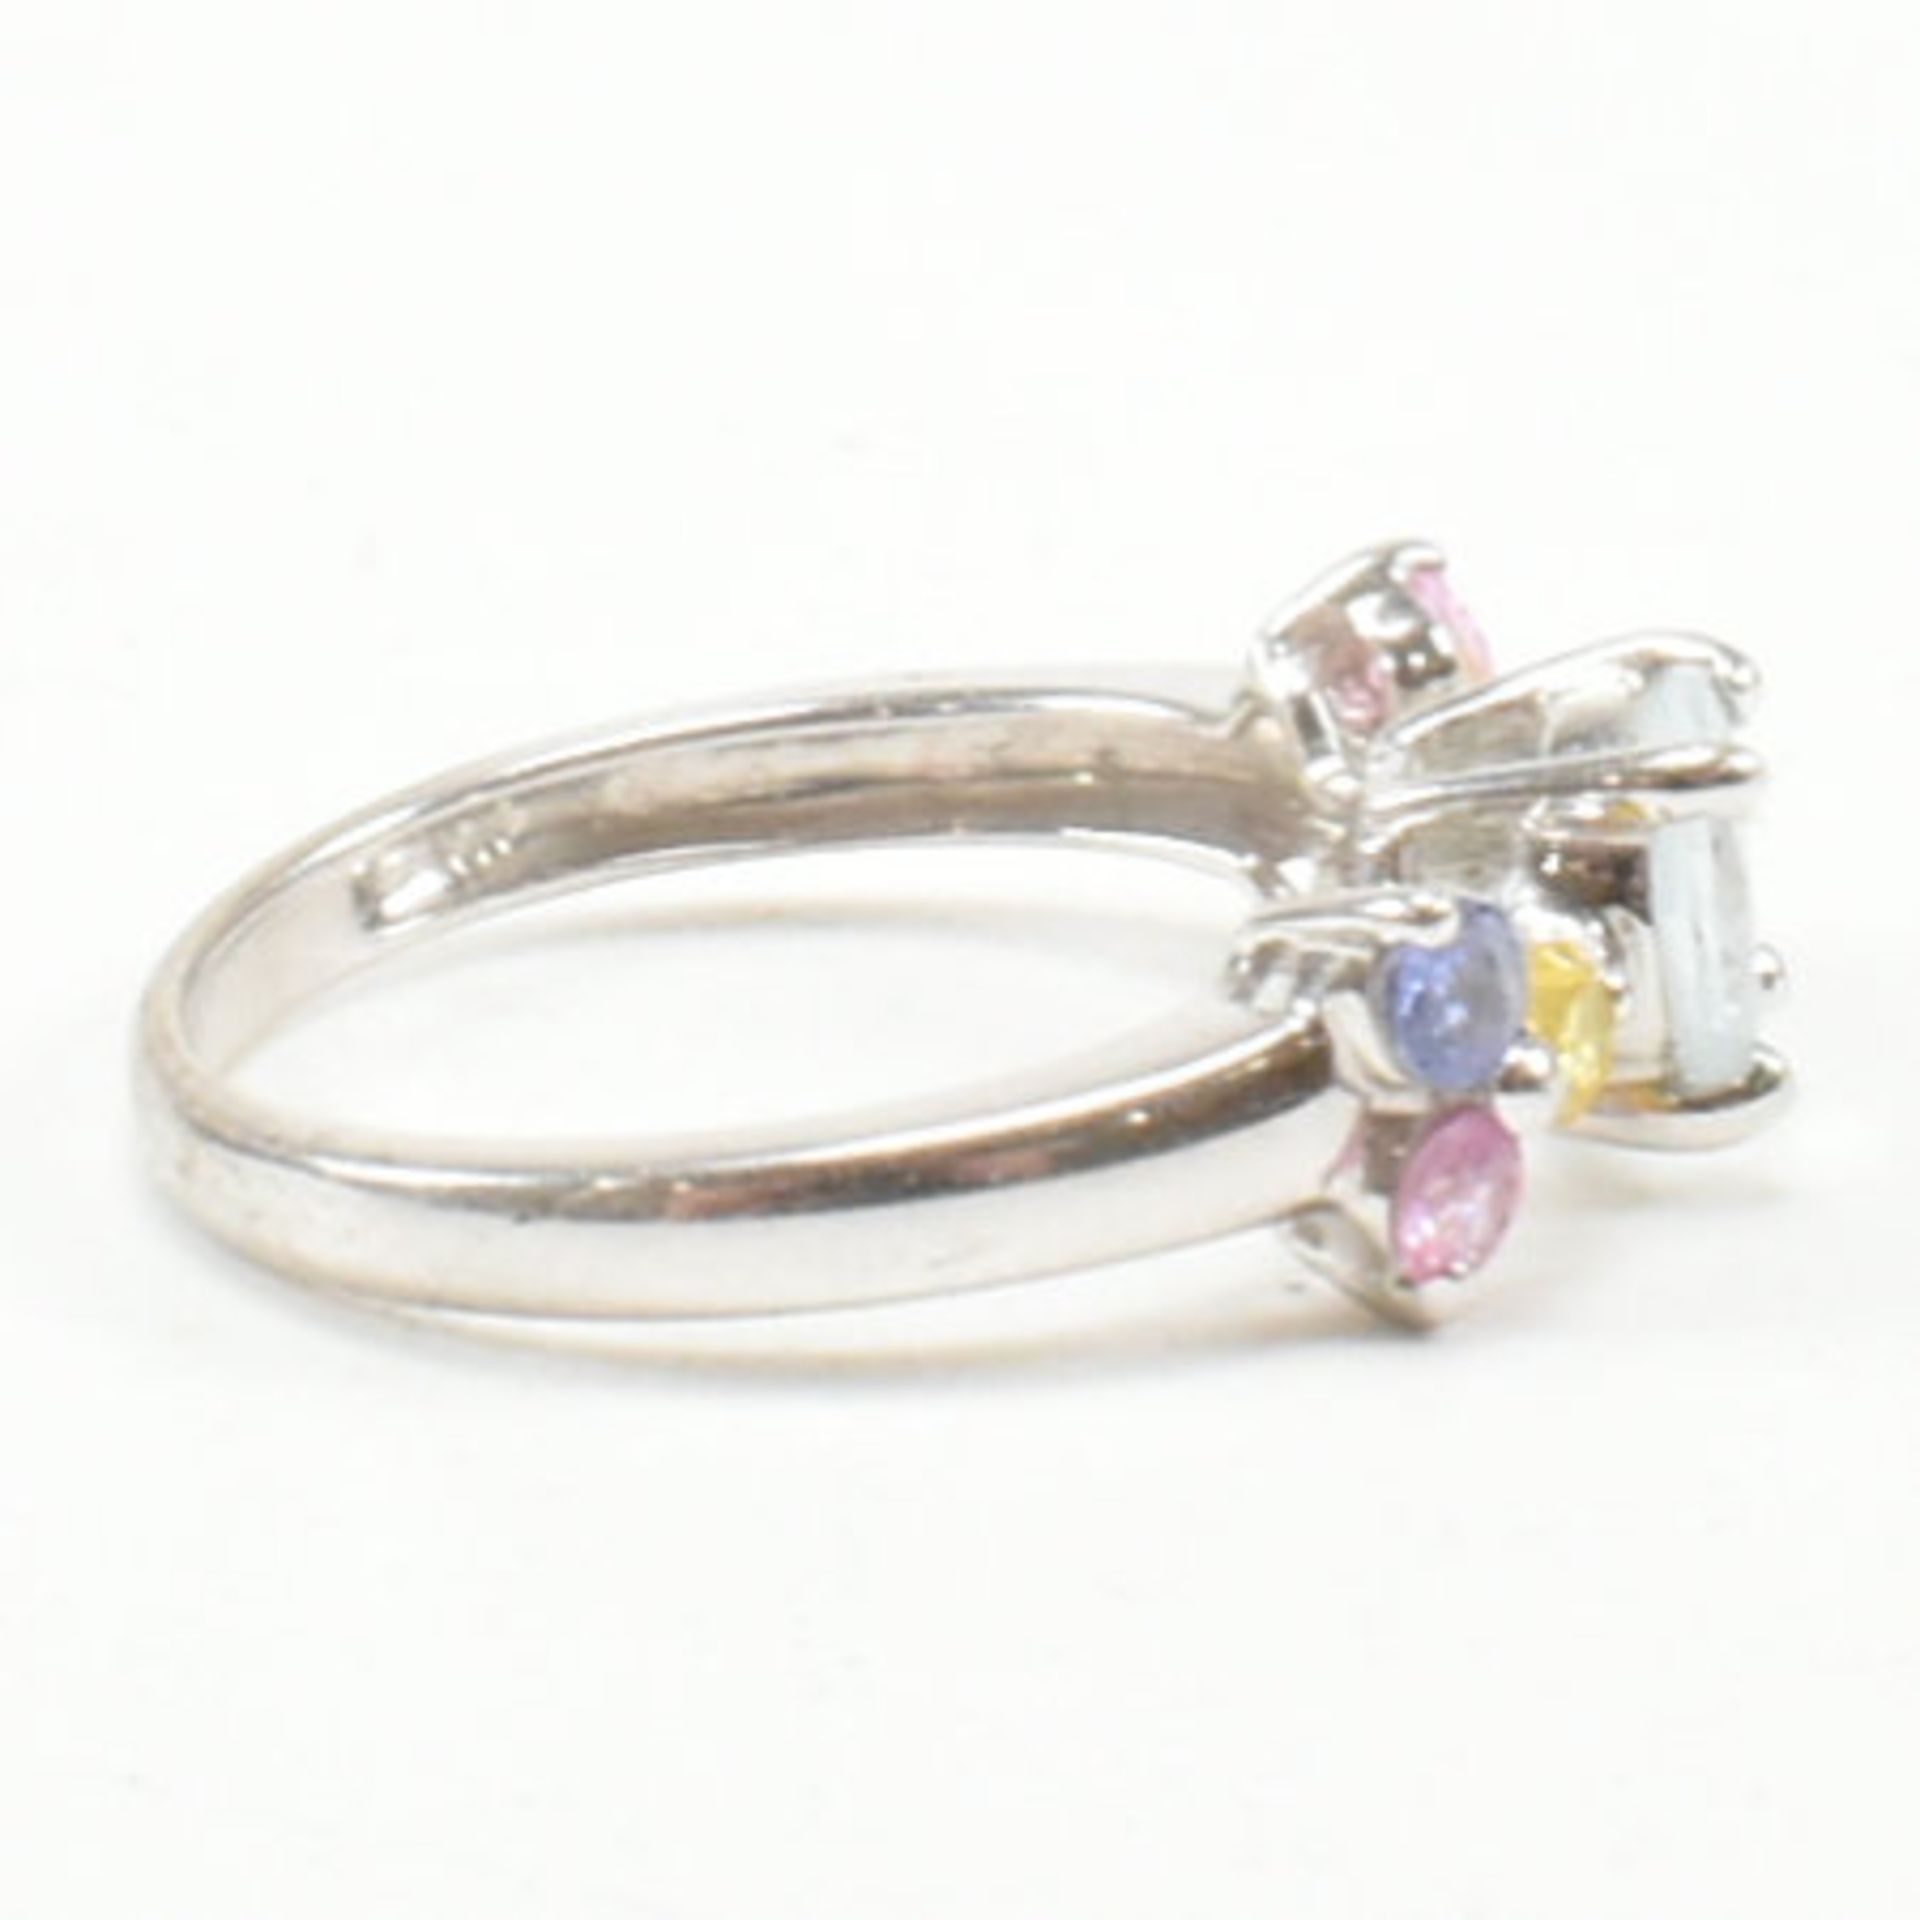 HALLMARKED 9CT WHITE GOLD AQUAMARINE RUBY & SAPPHIRE CLUSTER RING - Image 5 of 6